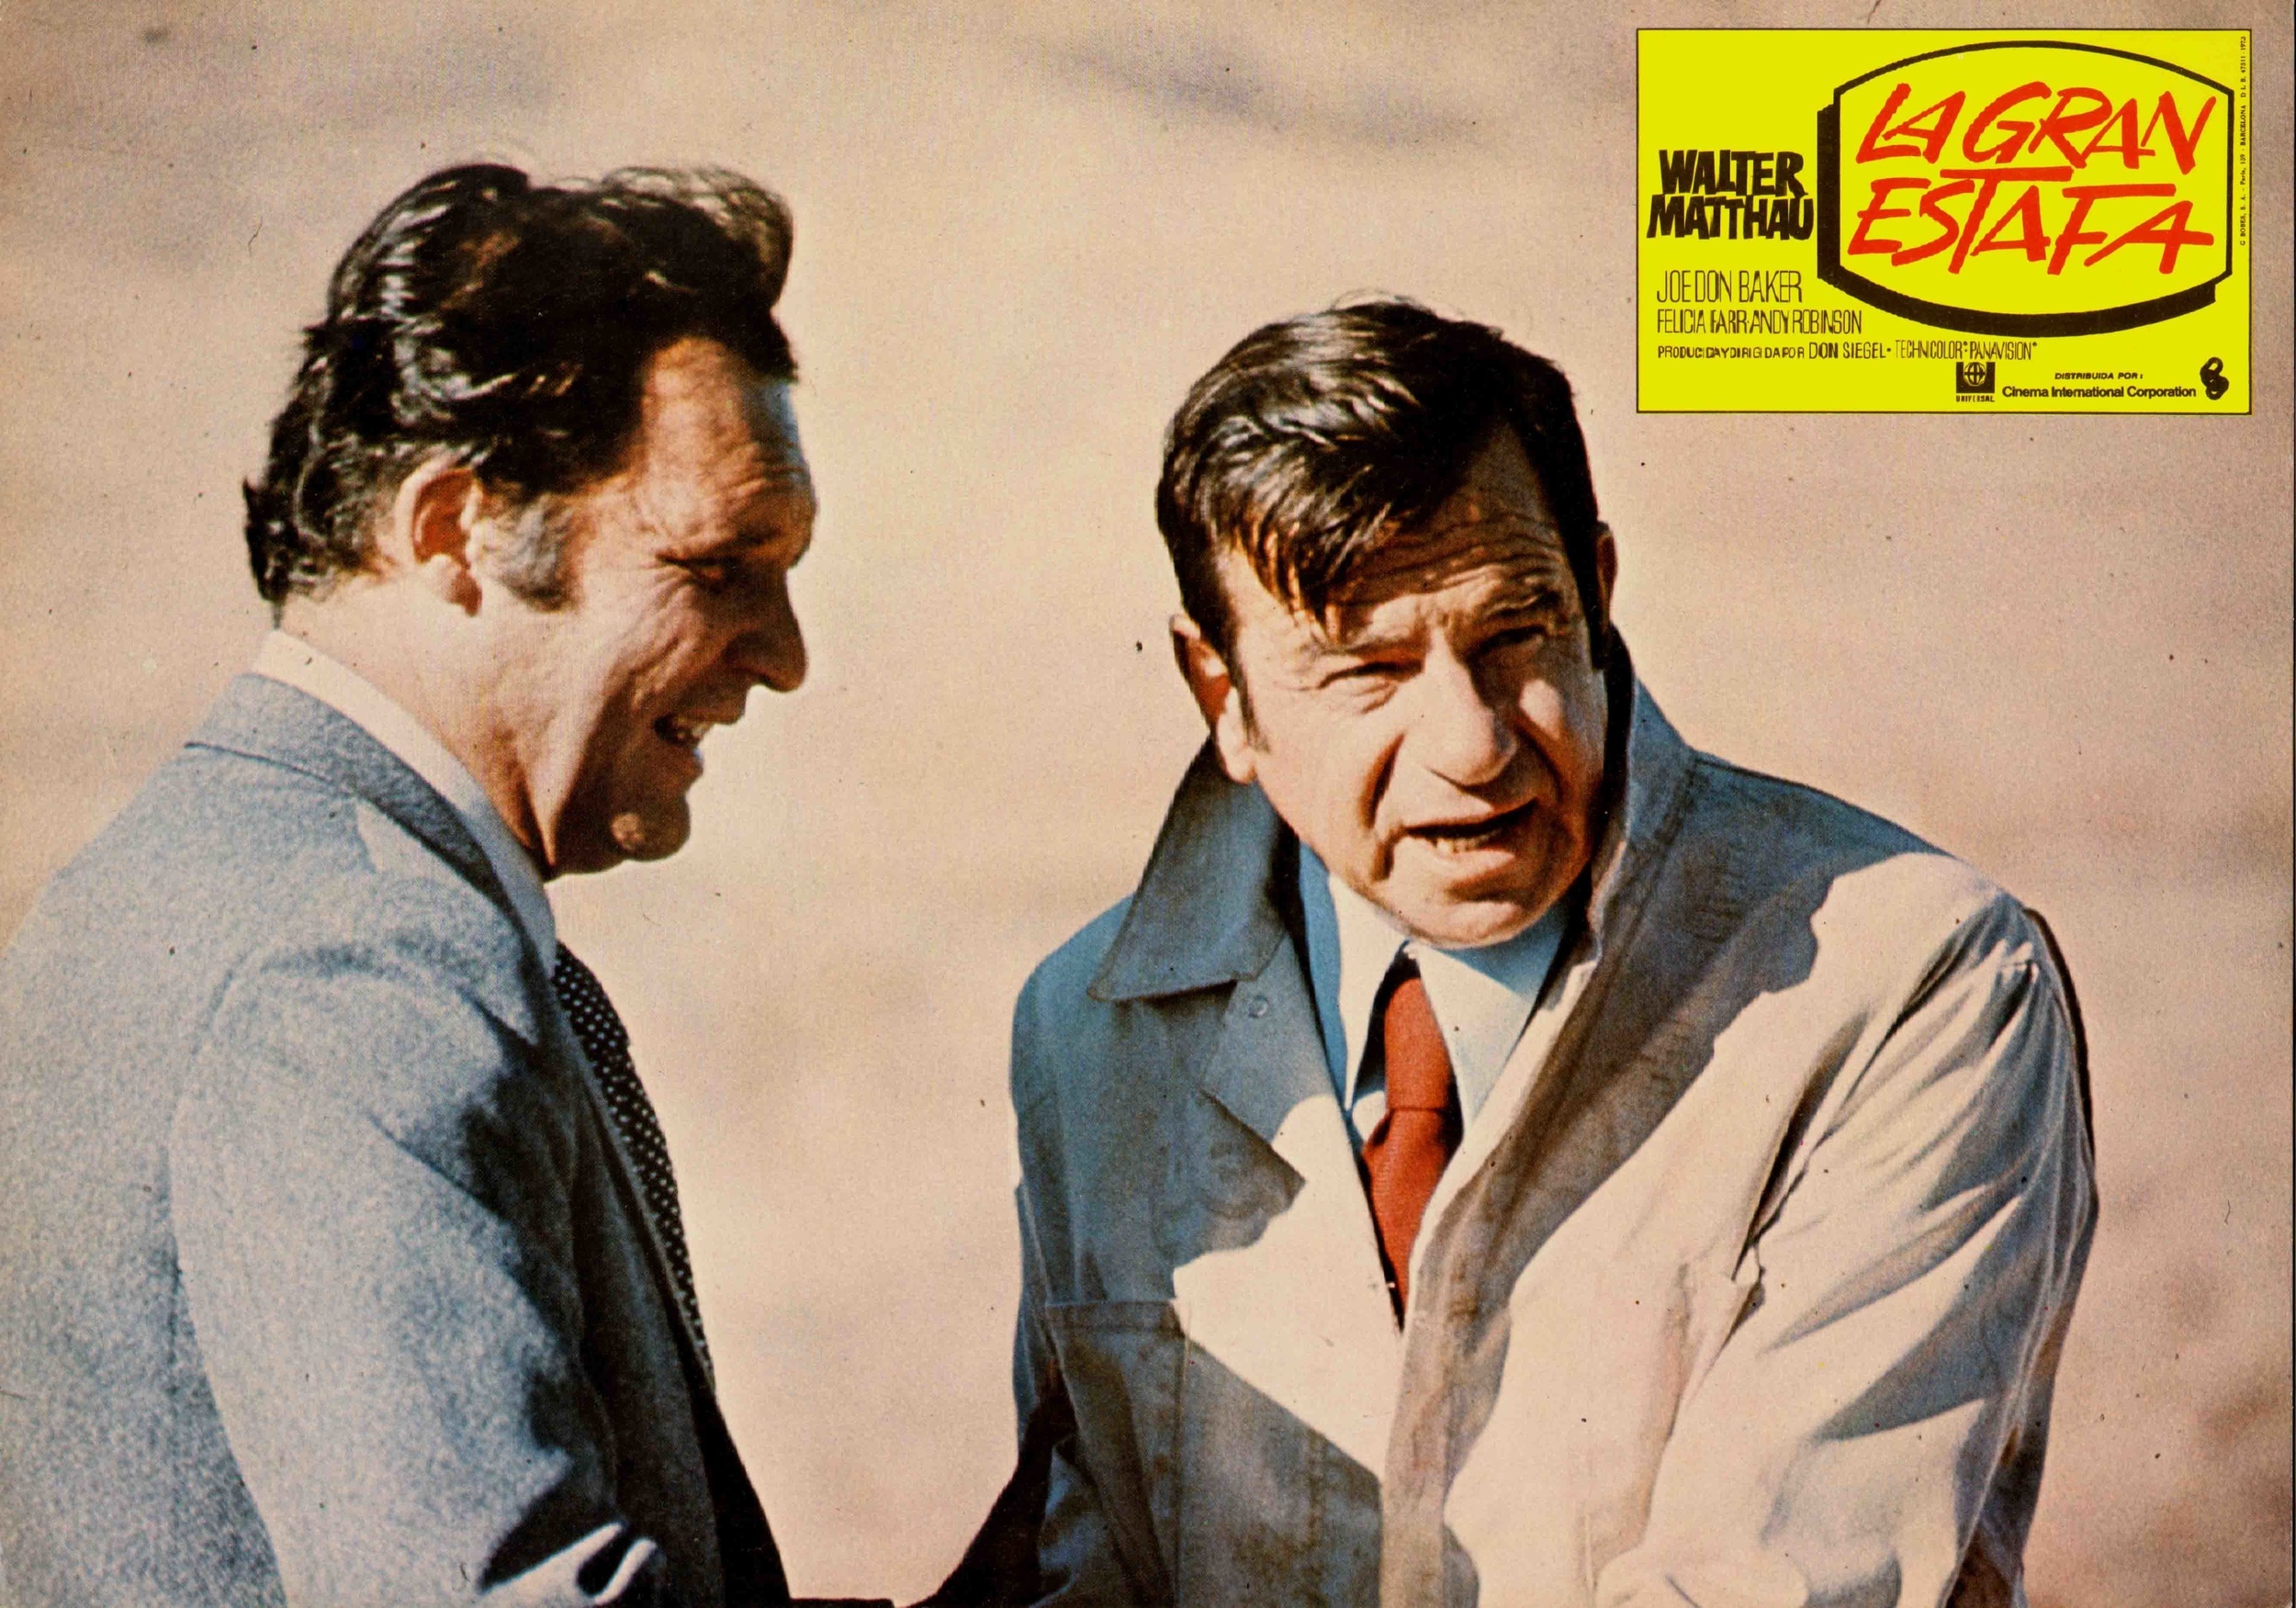 <p>If you only know Walter Matthau from “Grumpy Old Men” or “Dennis the Menace,” you missed out on many gritty dramas that he excelled in. Sure, Matthau could do comedy as well, but many a grimy ‘70s film starred or costarred Matthau, including “Charley Varrick.” In the film, Matthau plays Varrick, a cropduster and former stunt pilot who now robs banks.</p><p><a href='https://www.msn.com/en-us/community/channel/vid-cj9pqbr0vn9in2b6ddcd8sfgpfq6x6utp44fssrv6mc2gtybw0us'>Follow us on MSN to see more of our exclusive entertainment content.</a></p>